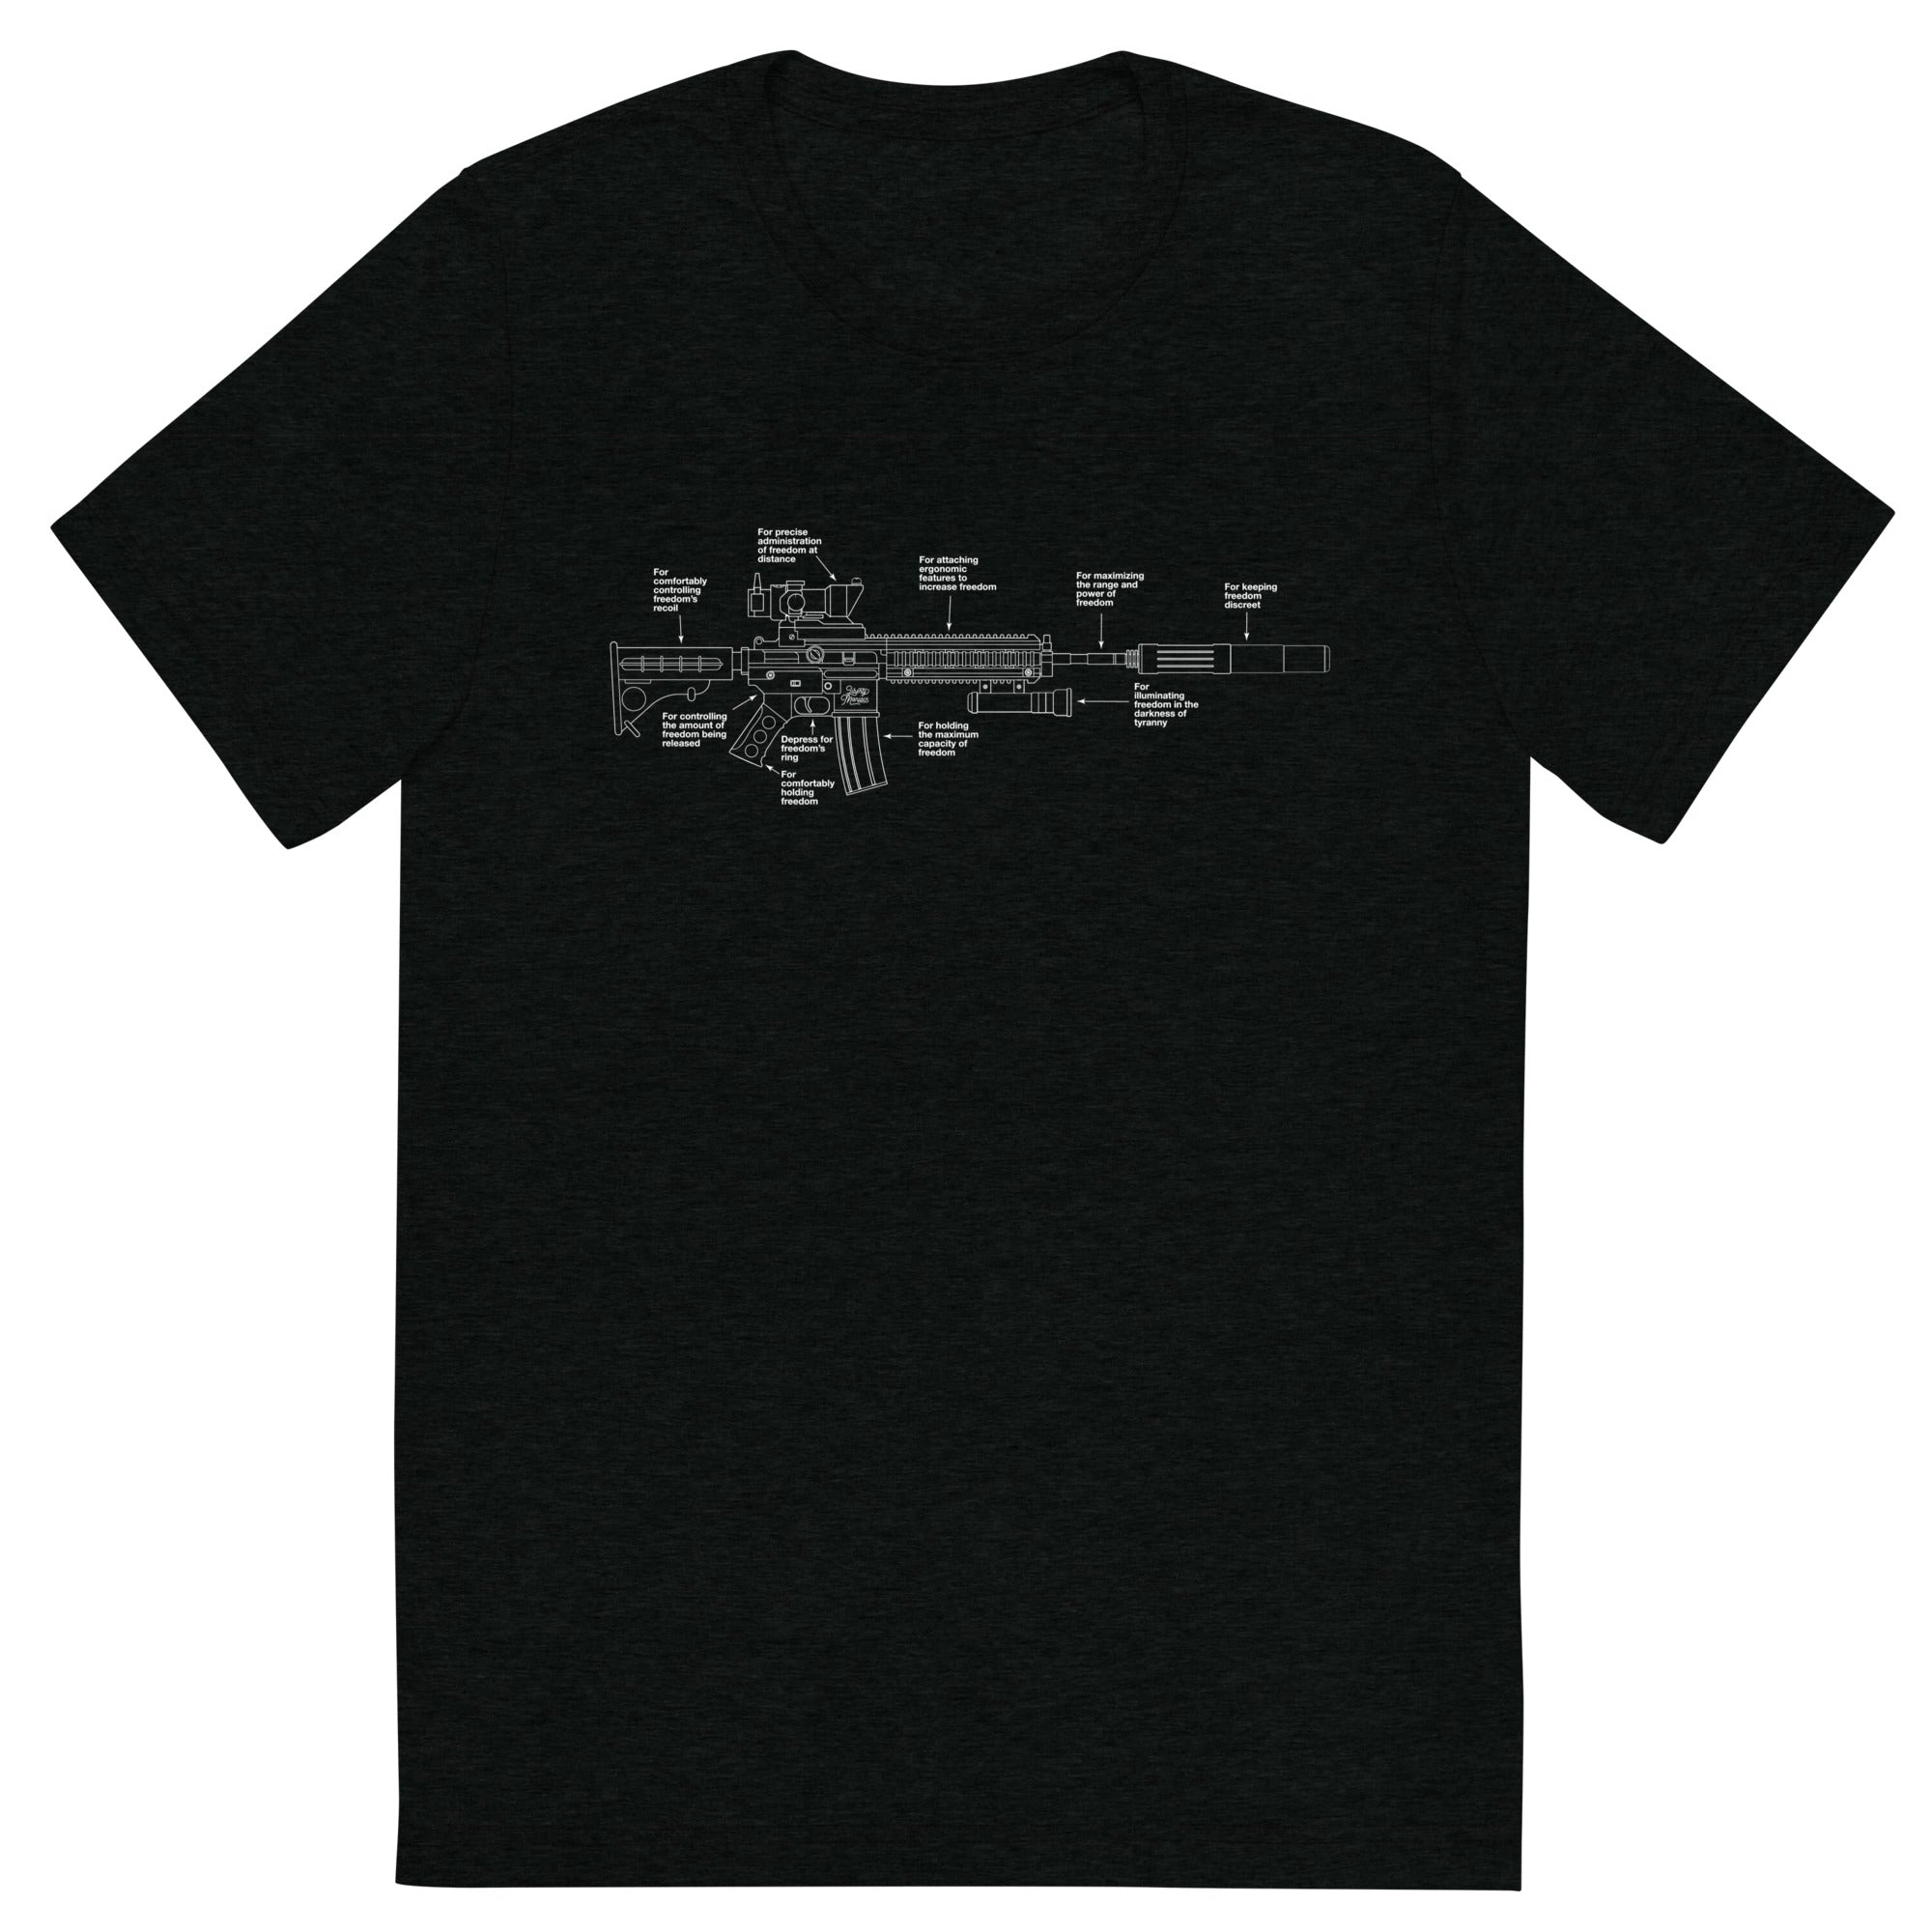 Components of Freedom Unisex Tri-Blend Track Shirt